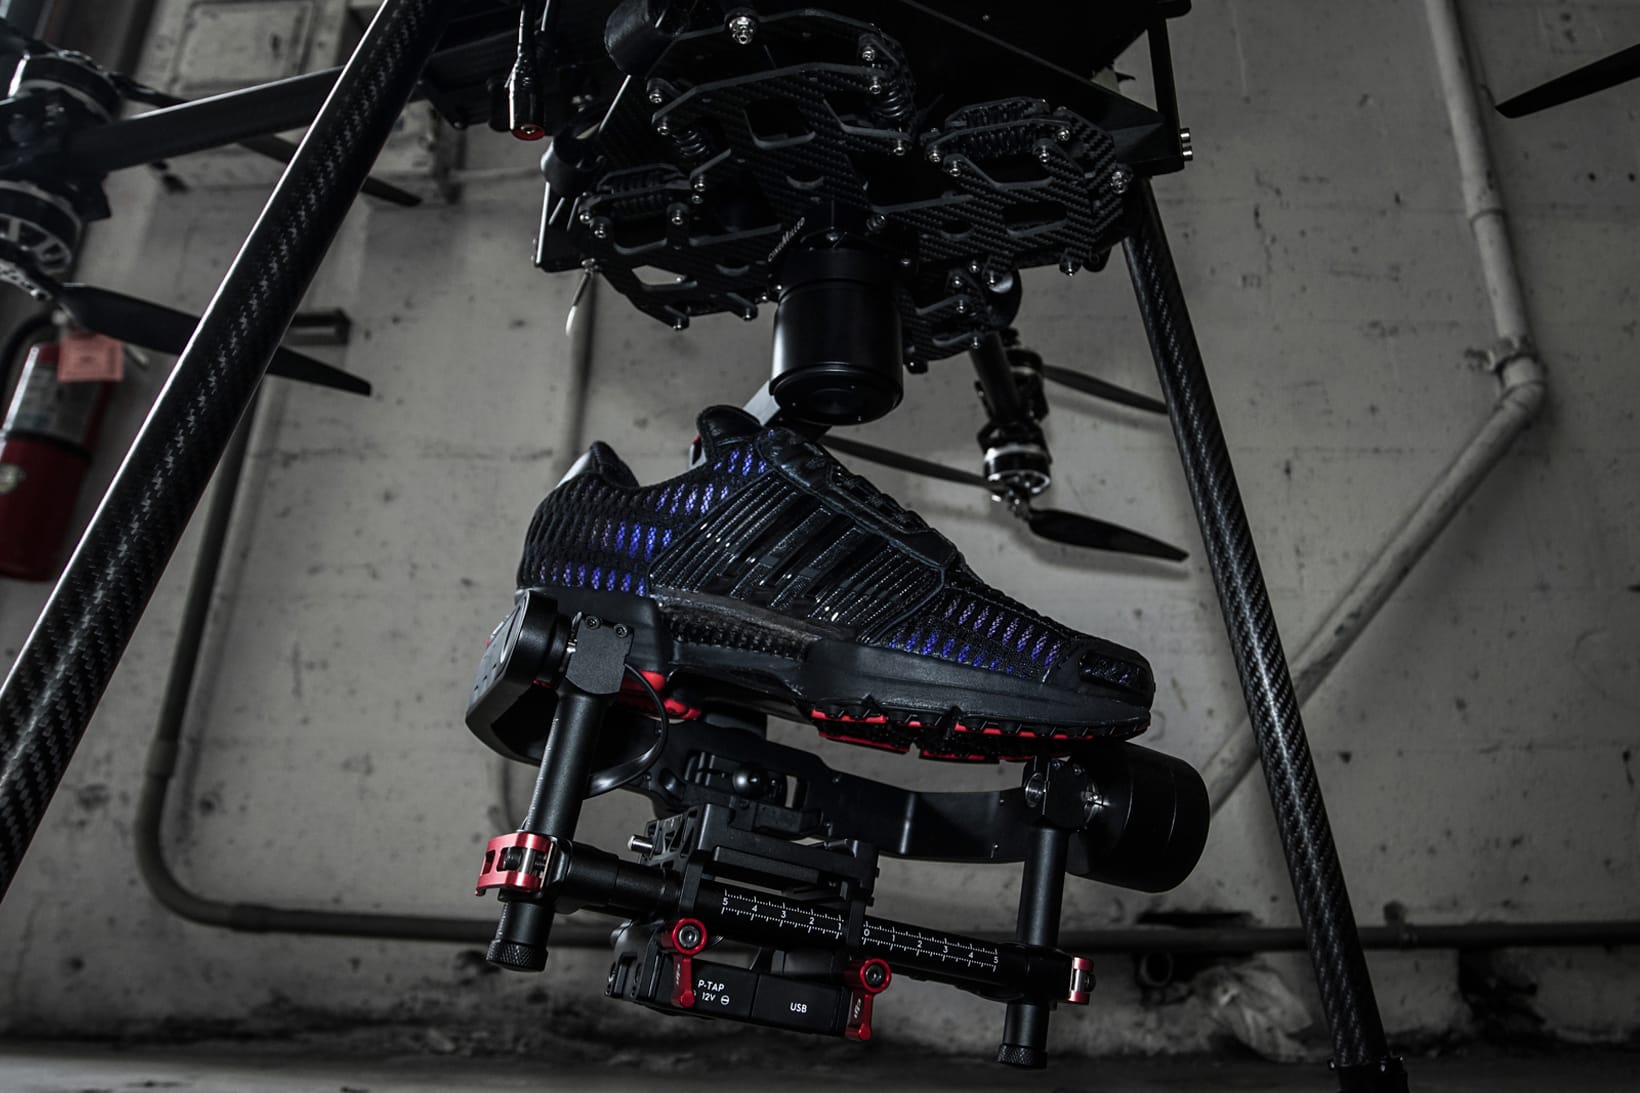 climacool shoe gallery